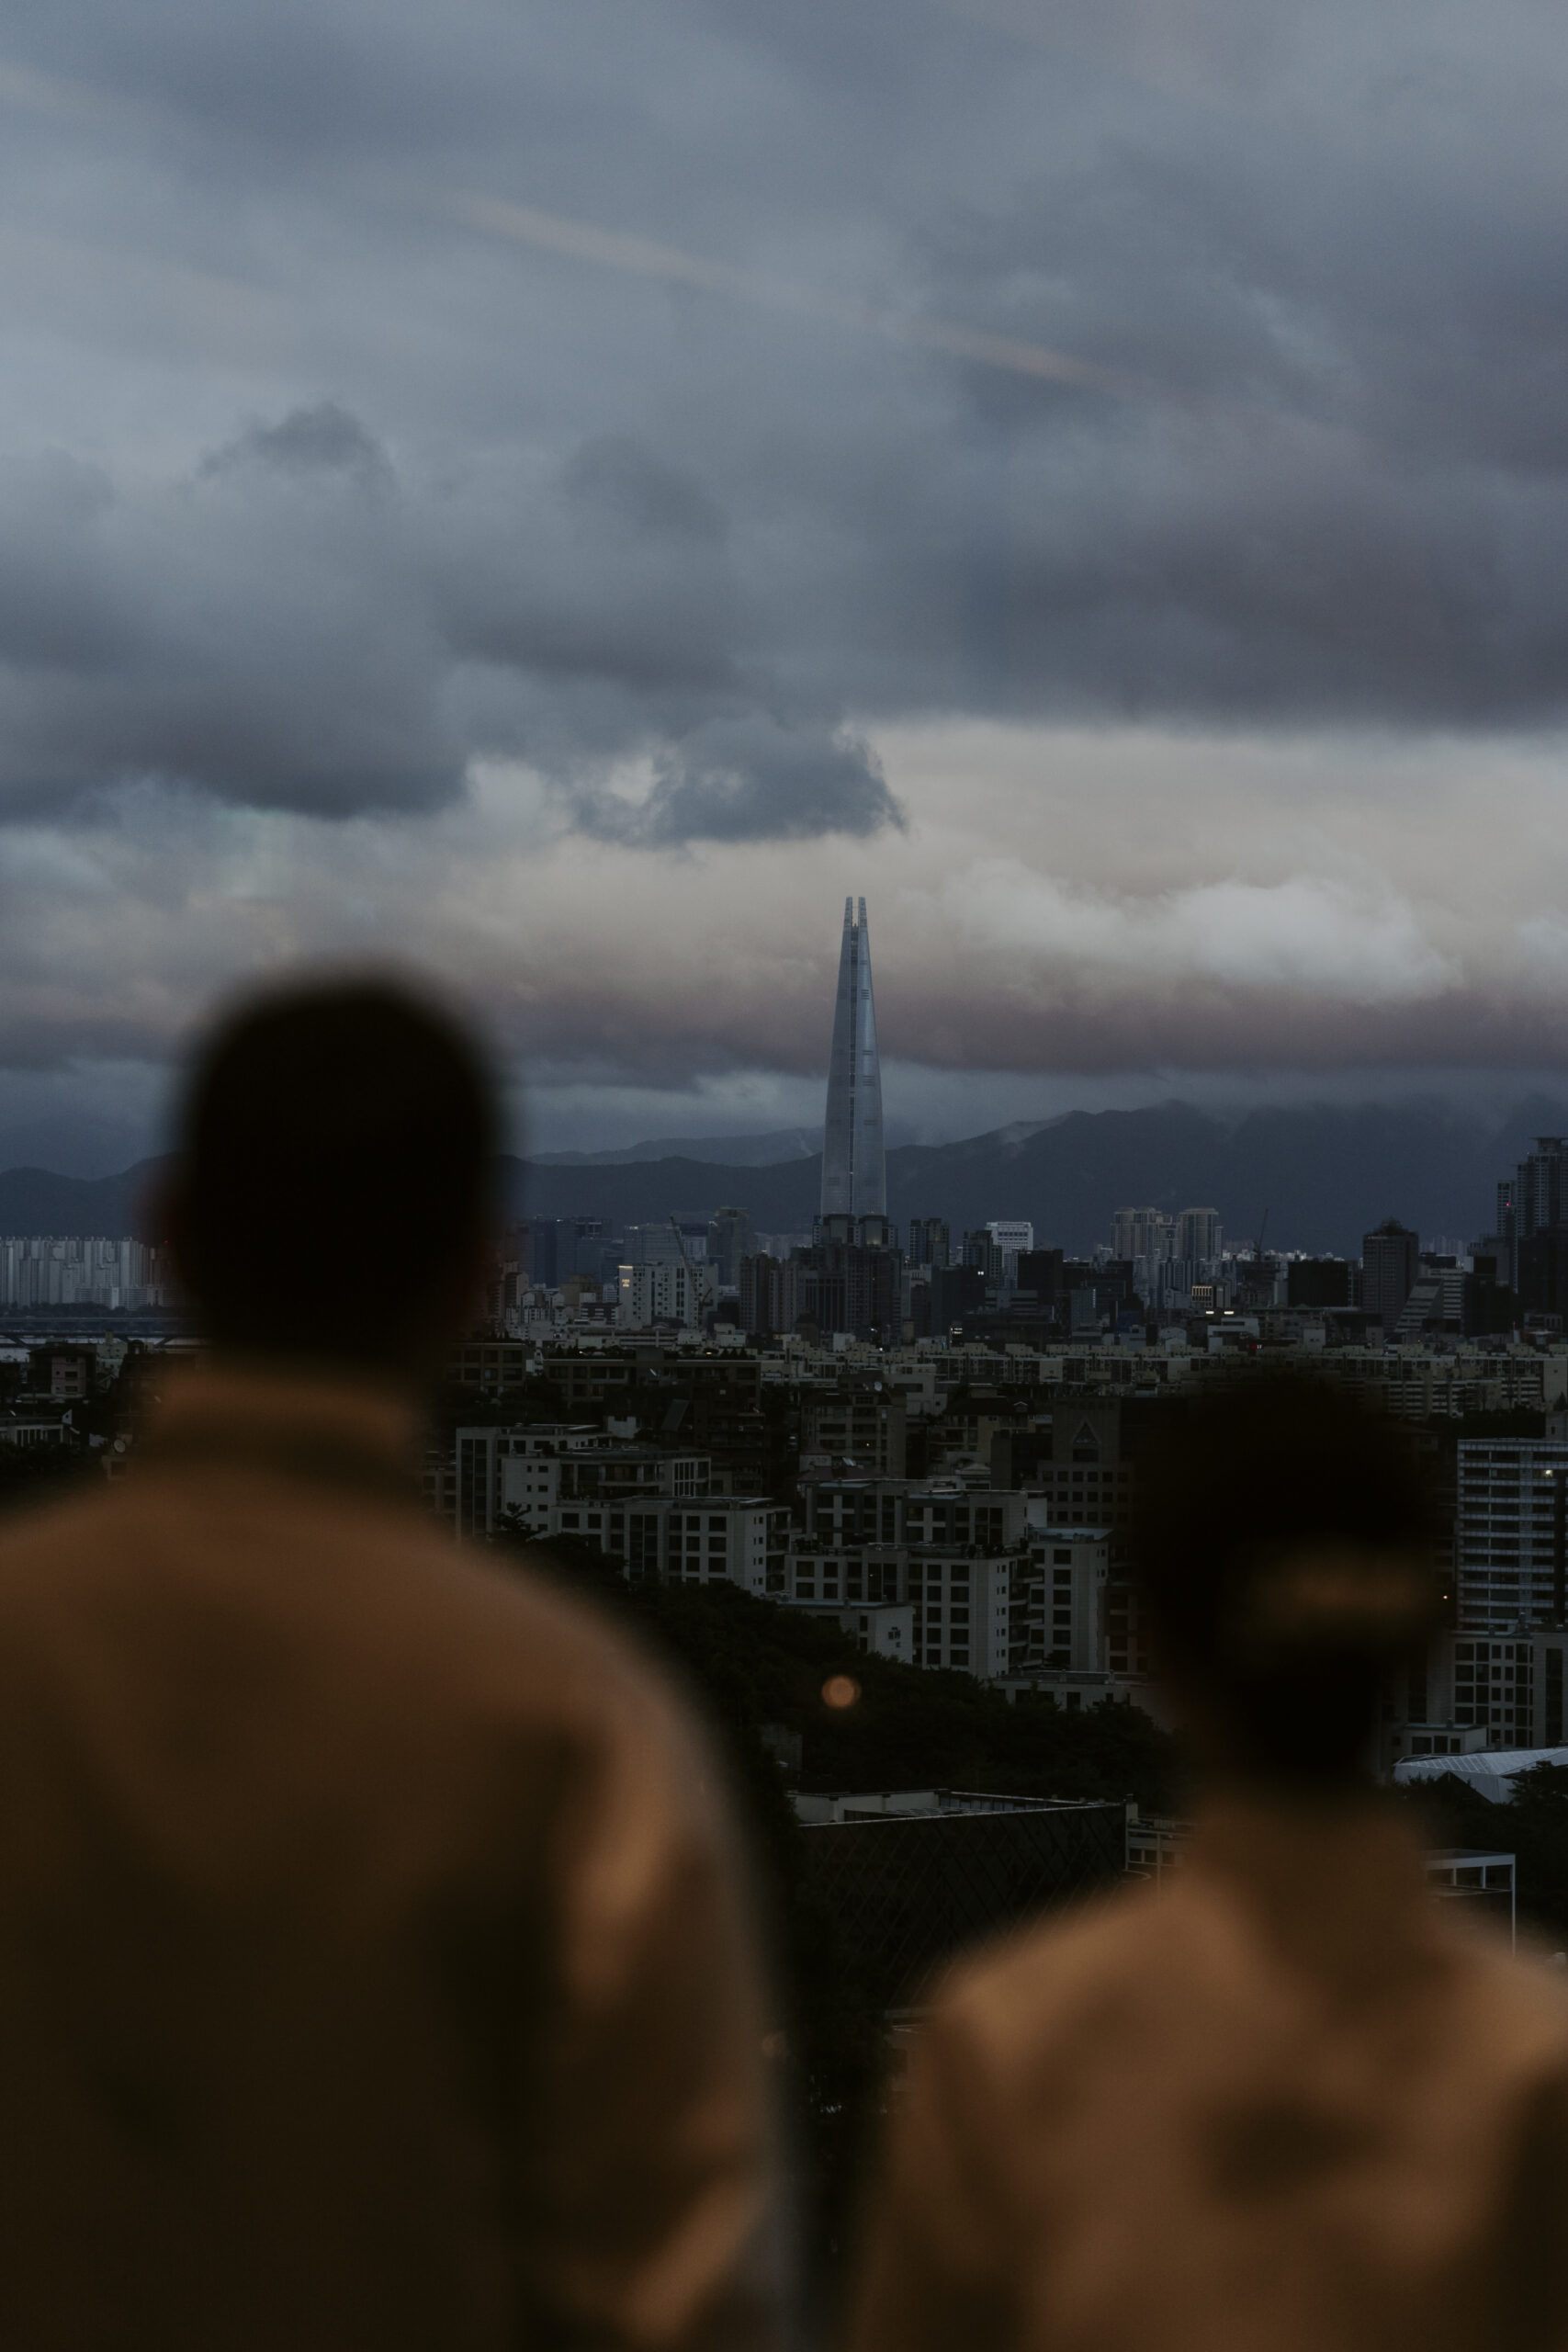 A couple looking at the Seoul skyline from the Grand Hyatt Hotel.